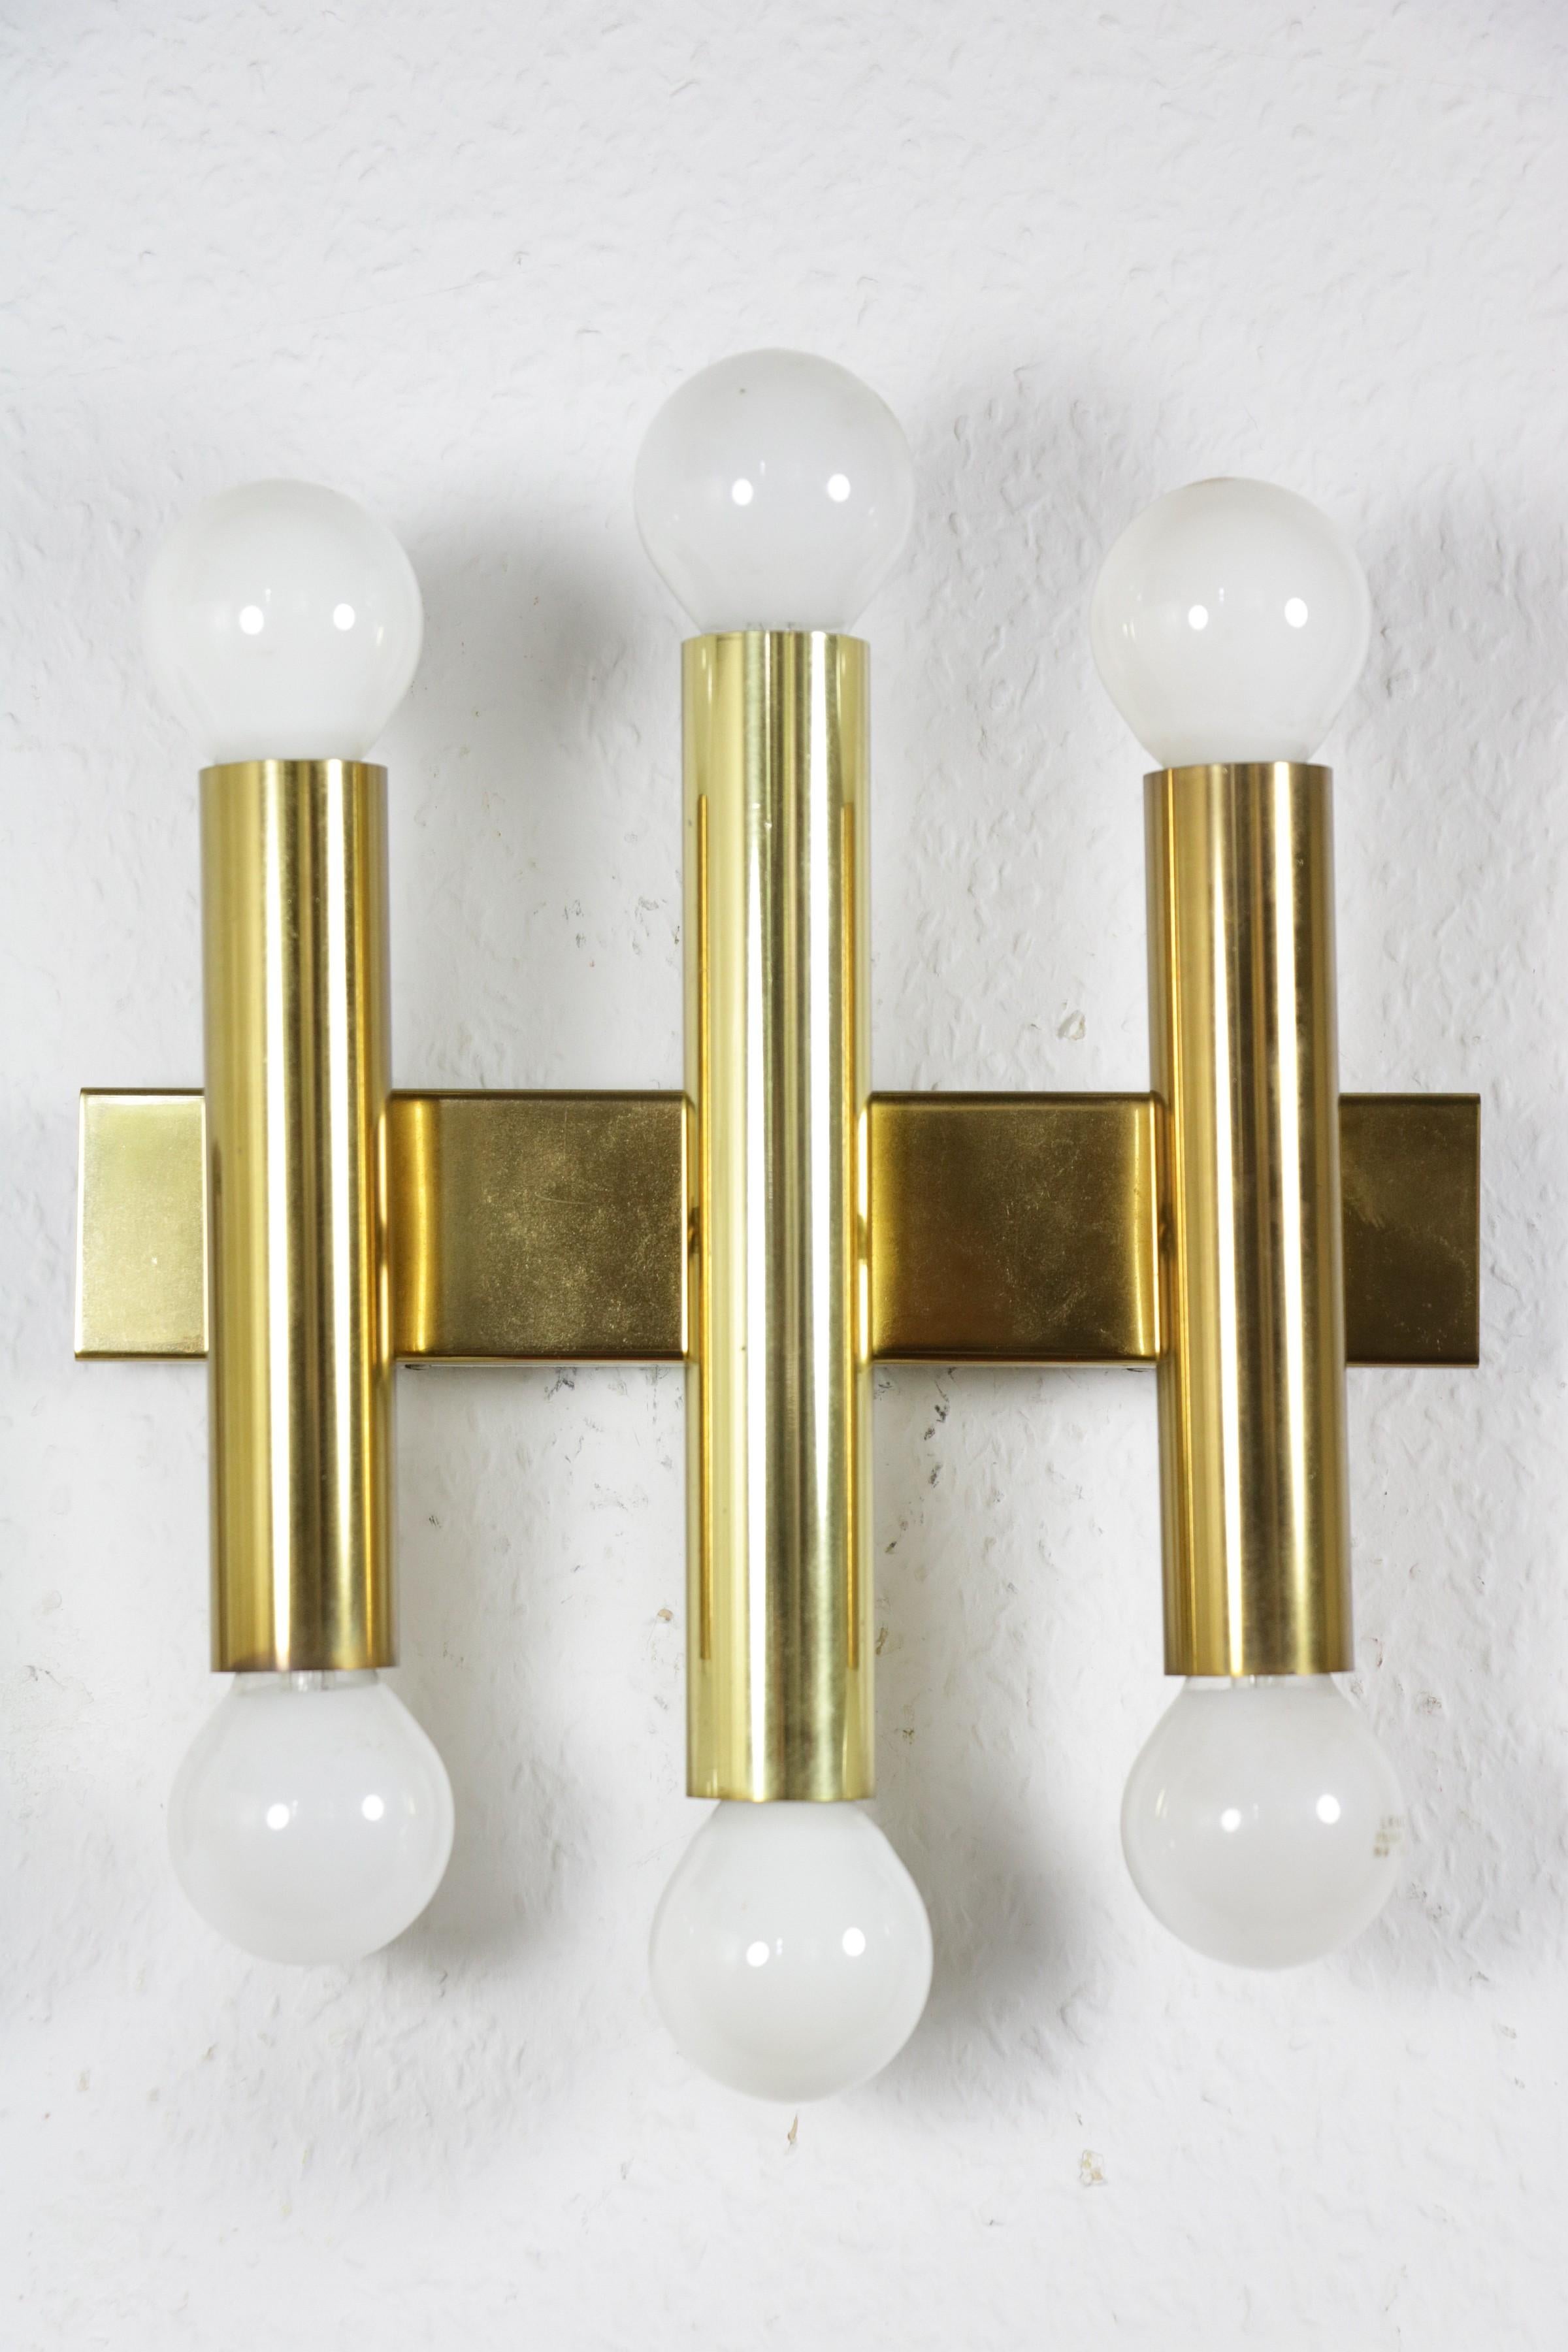 Beautiful classic and minimalistic wall lamp from DORIA

Made of brass

6 x E 14 sockets. Including Adapters for the USA.
Very well preserved.

Height: 19 cm (without bulb) / 7.48 inch
Width: 24 cm / 9.45 inch

Bulbs for Europe included